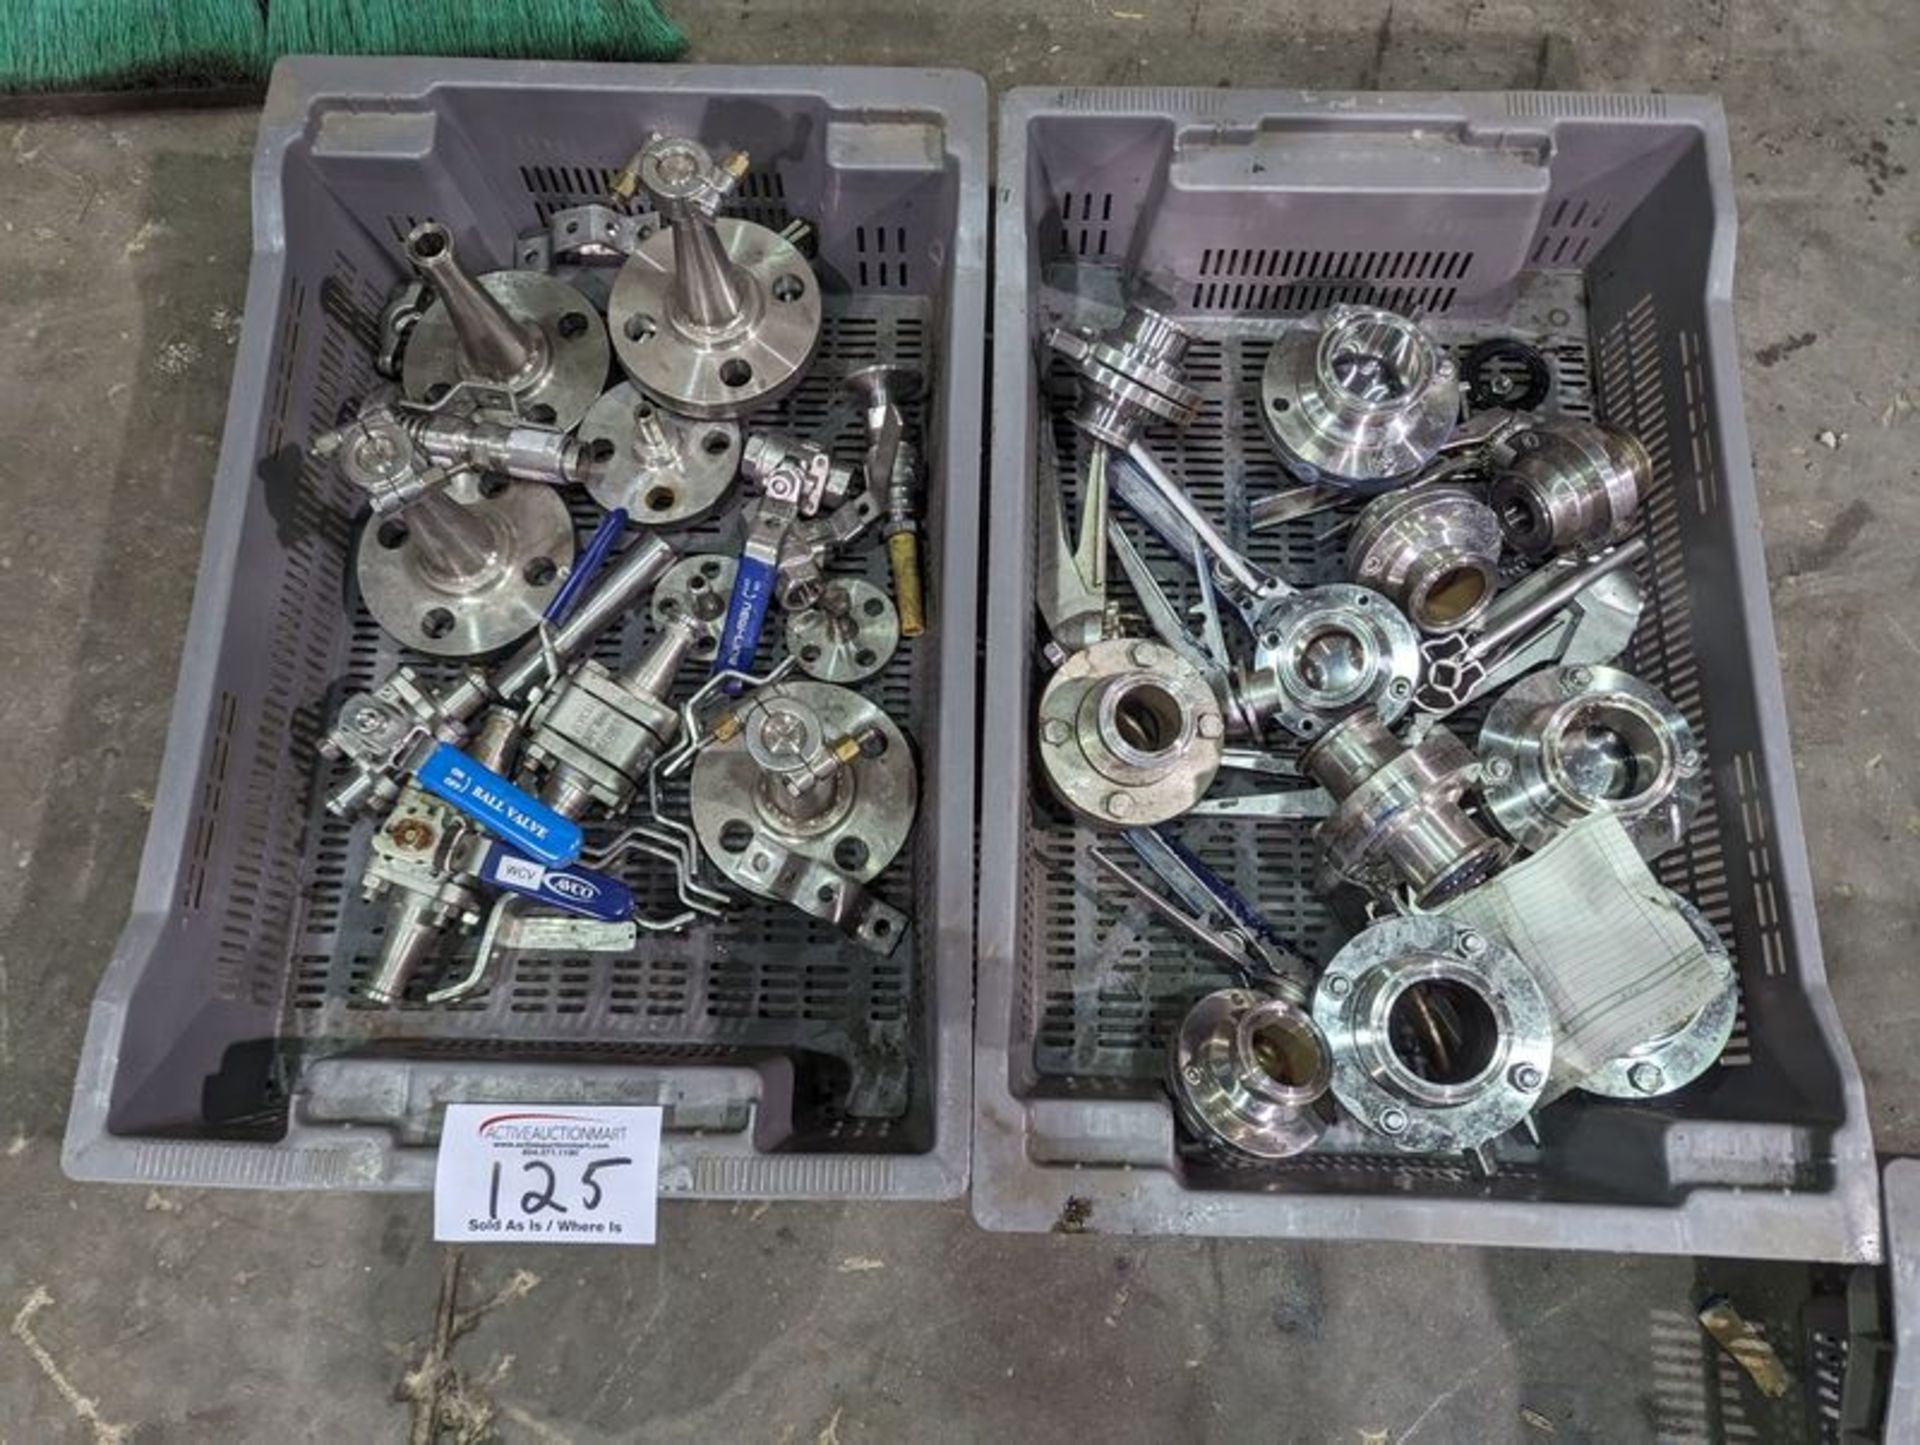 2 Crates of Assorted Stainless Steel Valves